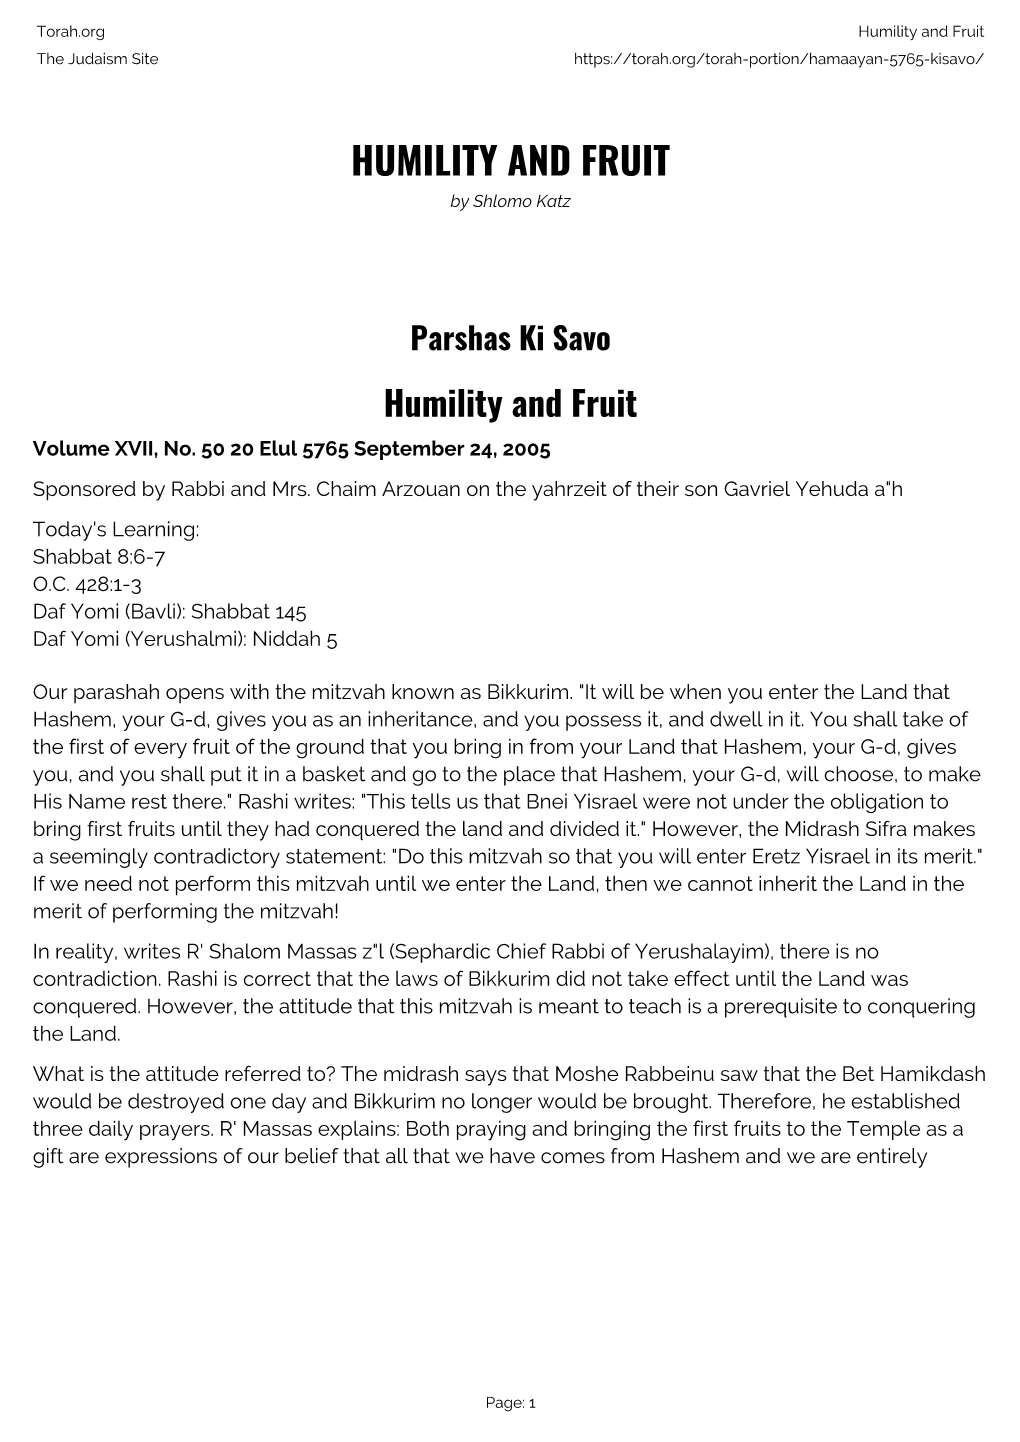 Humility and Fruit the Judaism Site